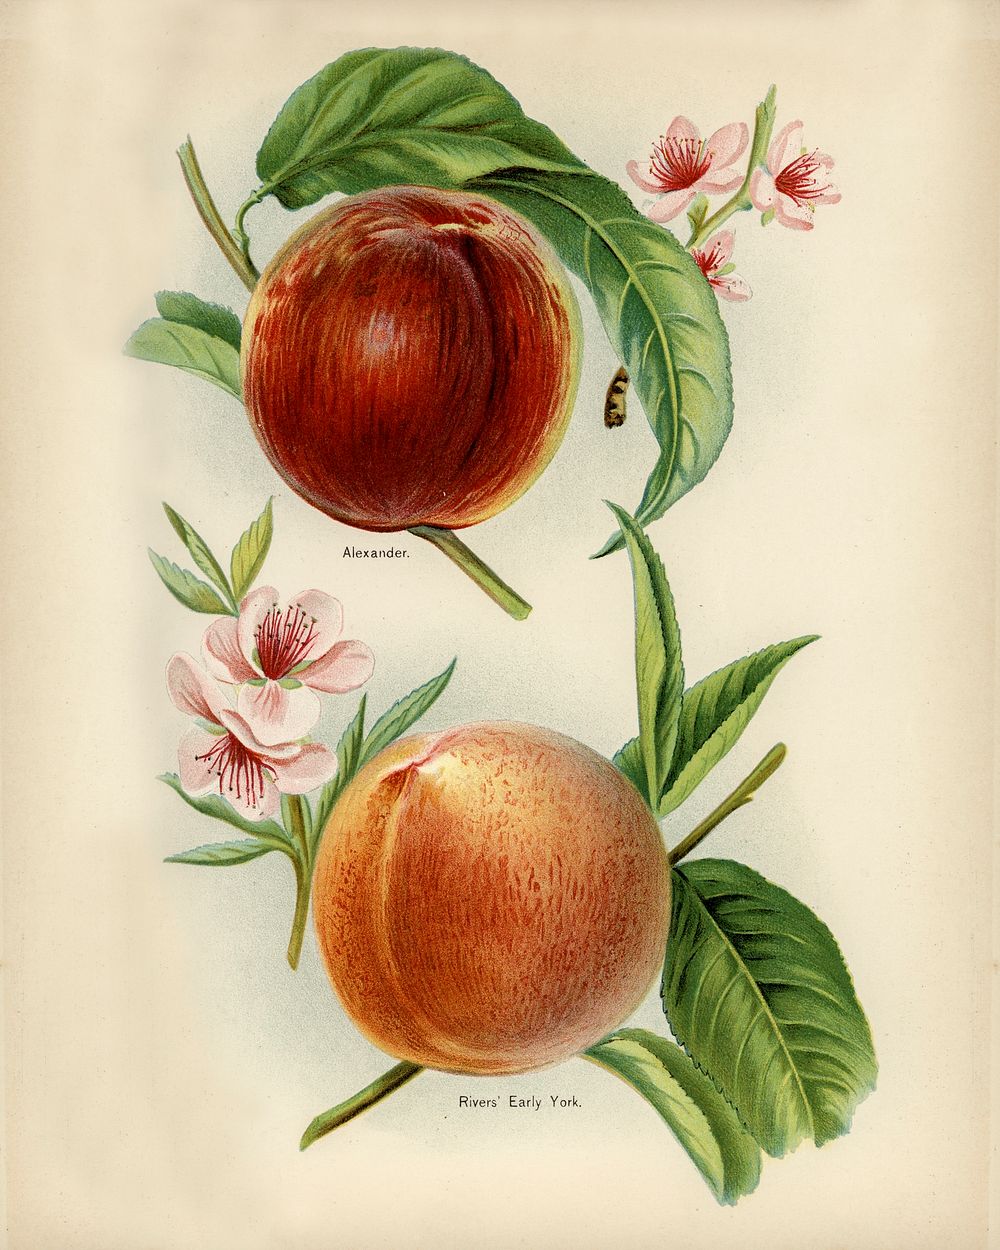 Vintage illustration of alexander, rivers' early york nectarines digitally enhanced from our own vintage edition of The…